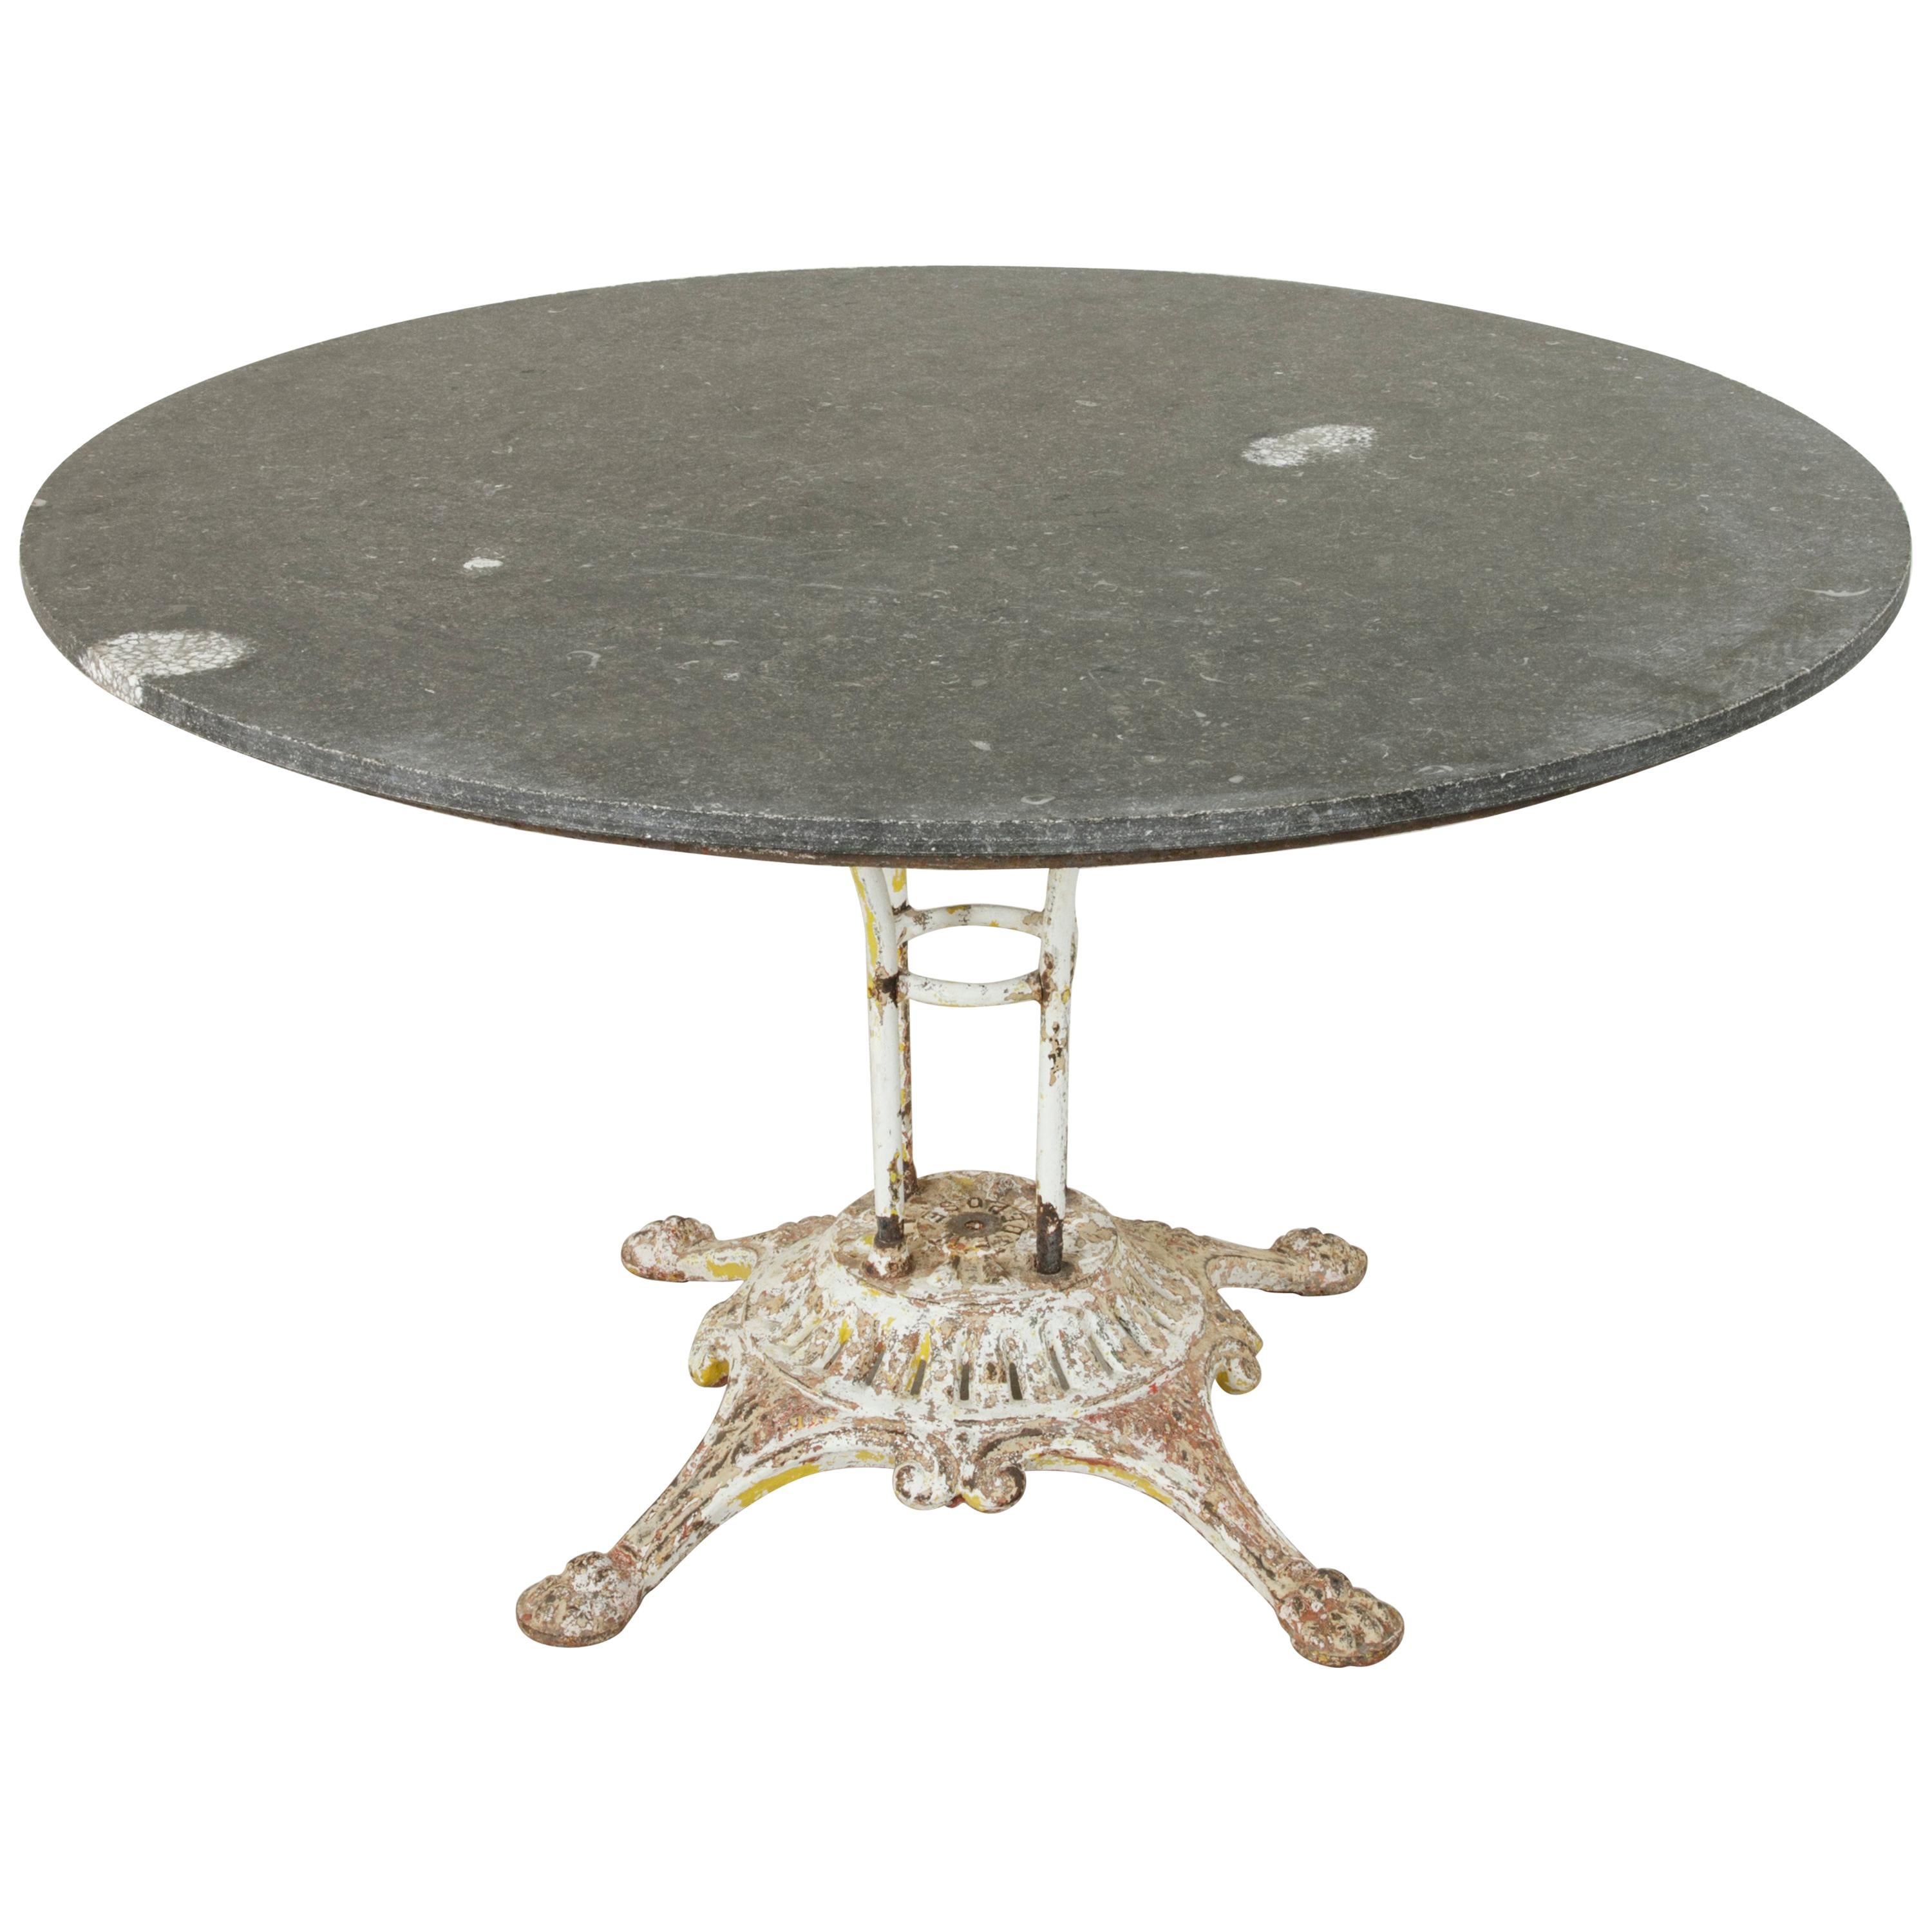 Large French Iron Garden Table with 49 Inch Diameter Blue Stone Top, circa 1900